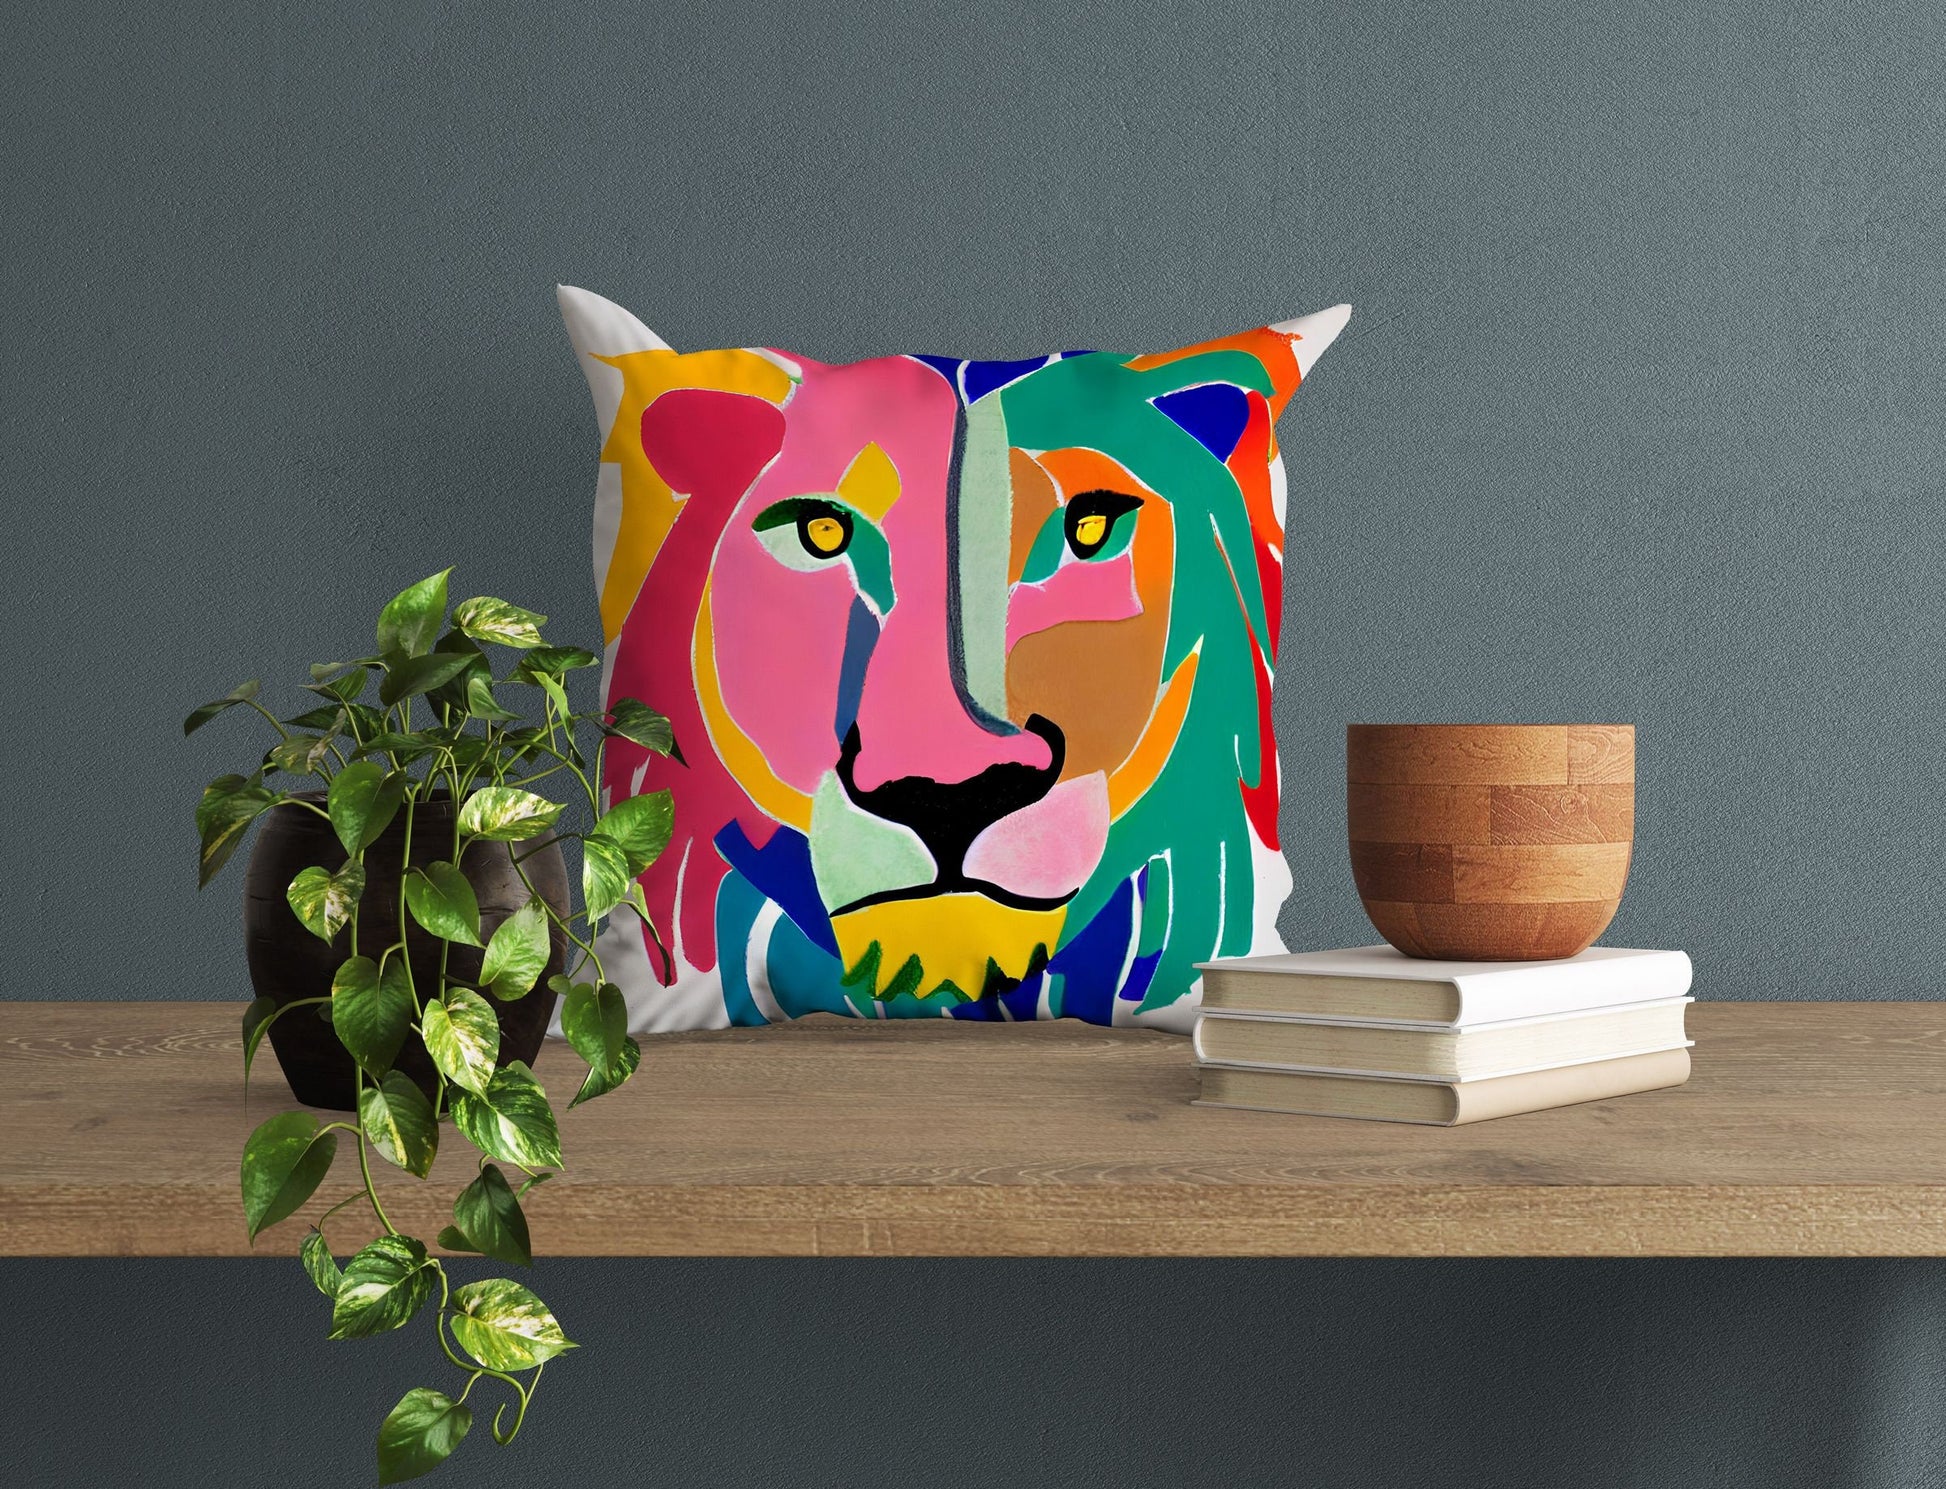 Original Art African Wildlife Lion King Throw Pillow, Abstract Throw Pillow Cover, Comfortable, Colorful Pillow Case, Square Pillow